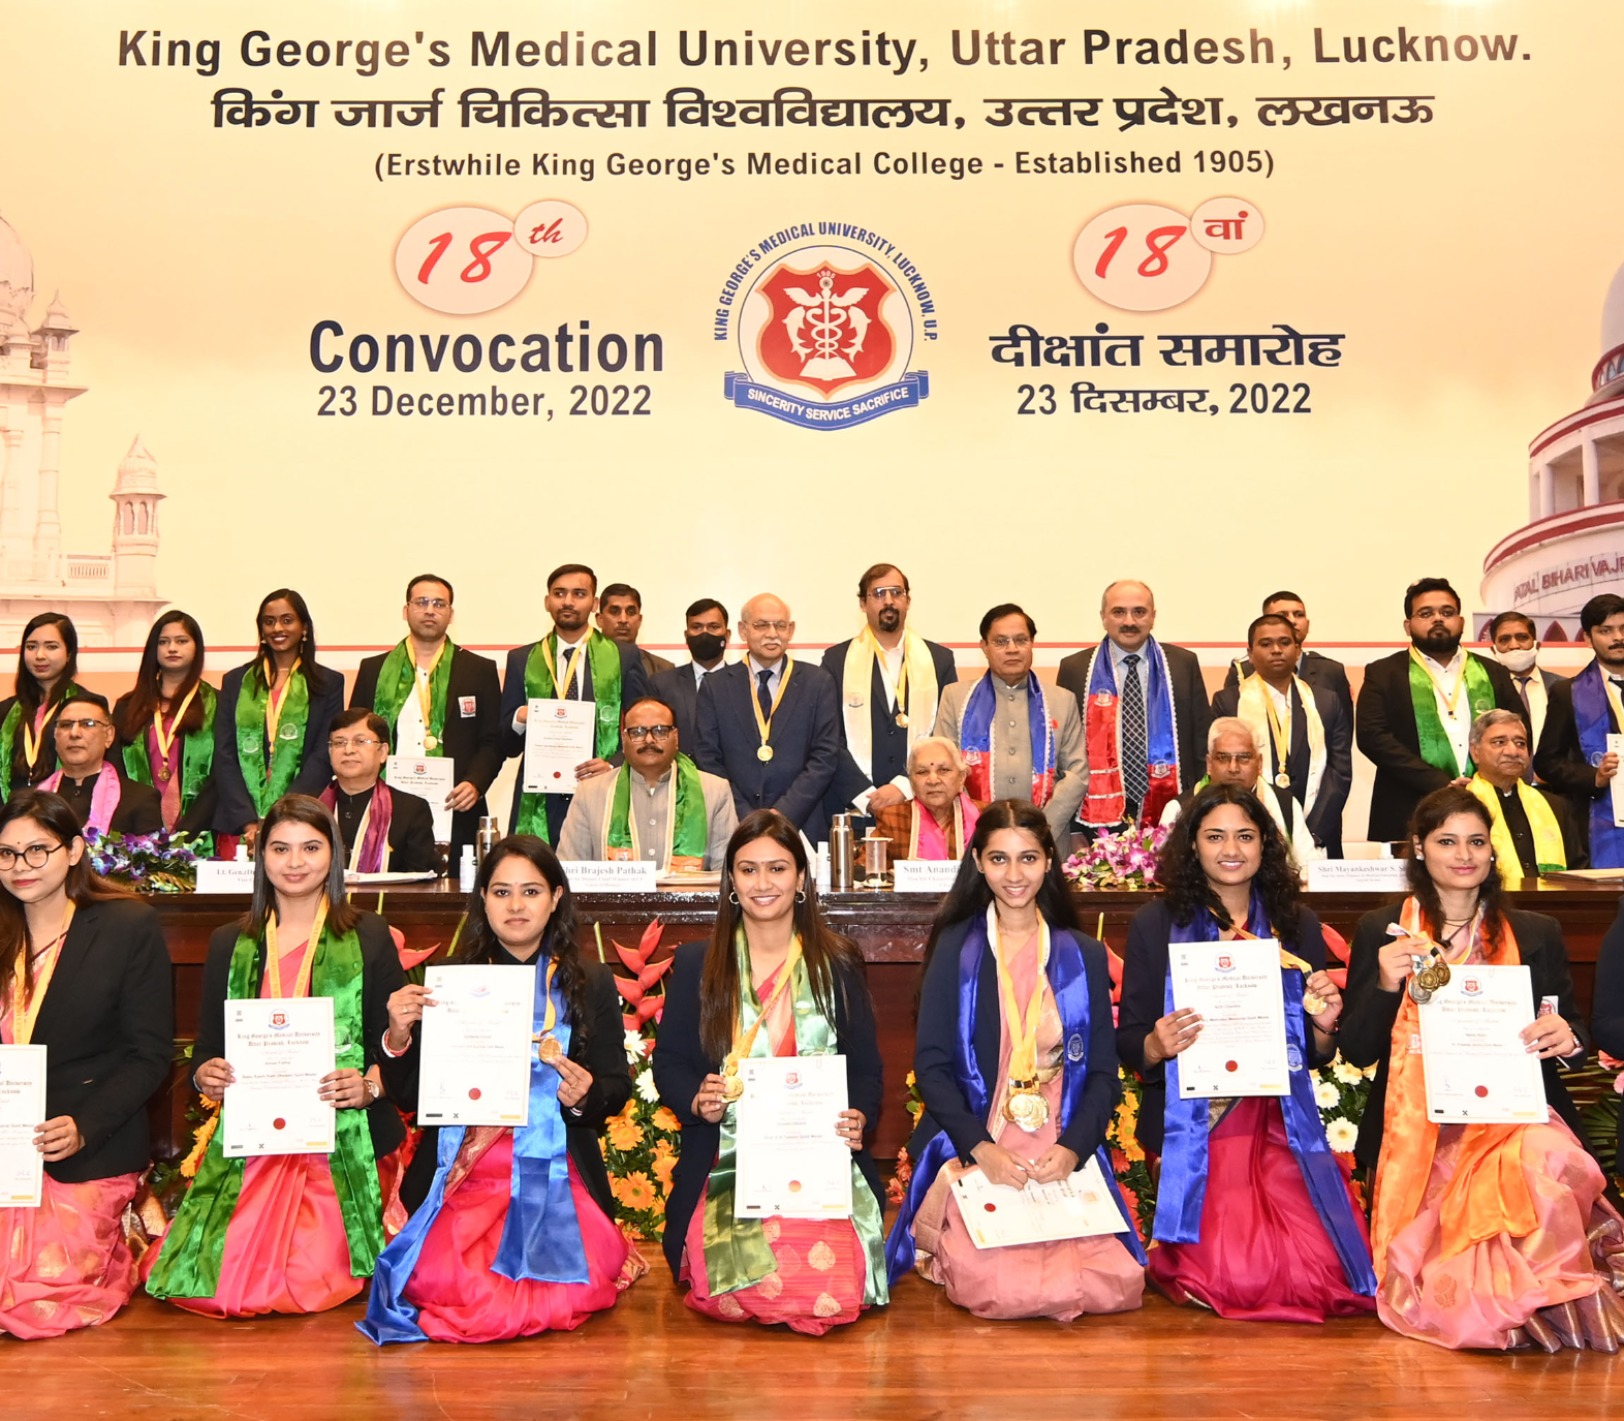 18th convocation ceremony of KGMU Lucknow concluded